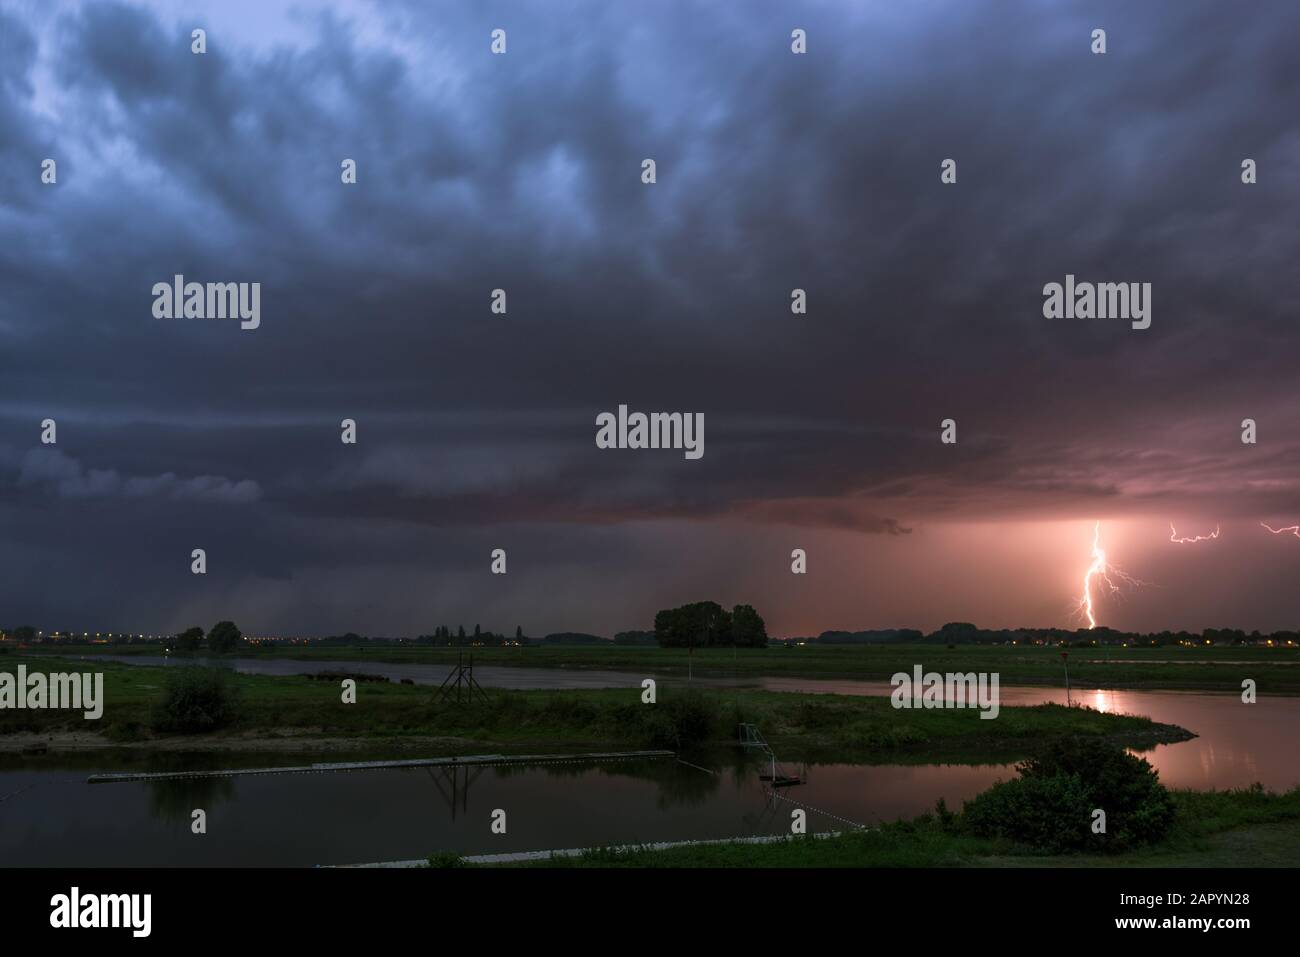 Shelfcloud and lightning from a severe thunderstorm near a river at dusk Stock Photo